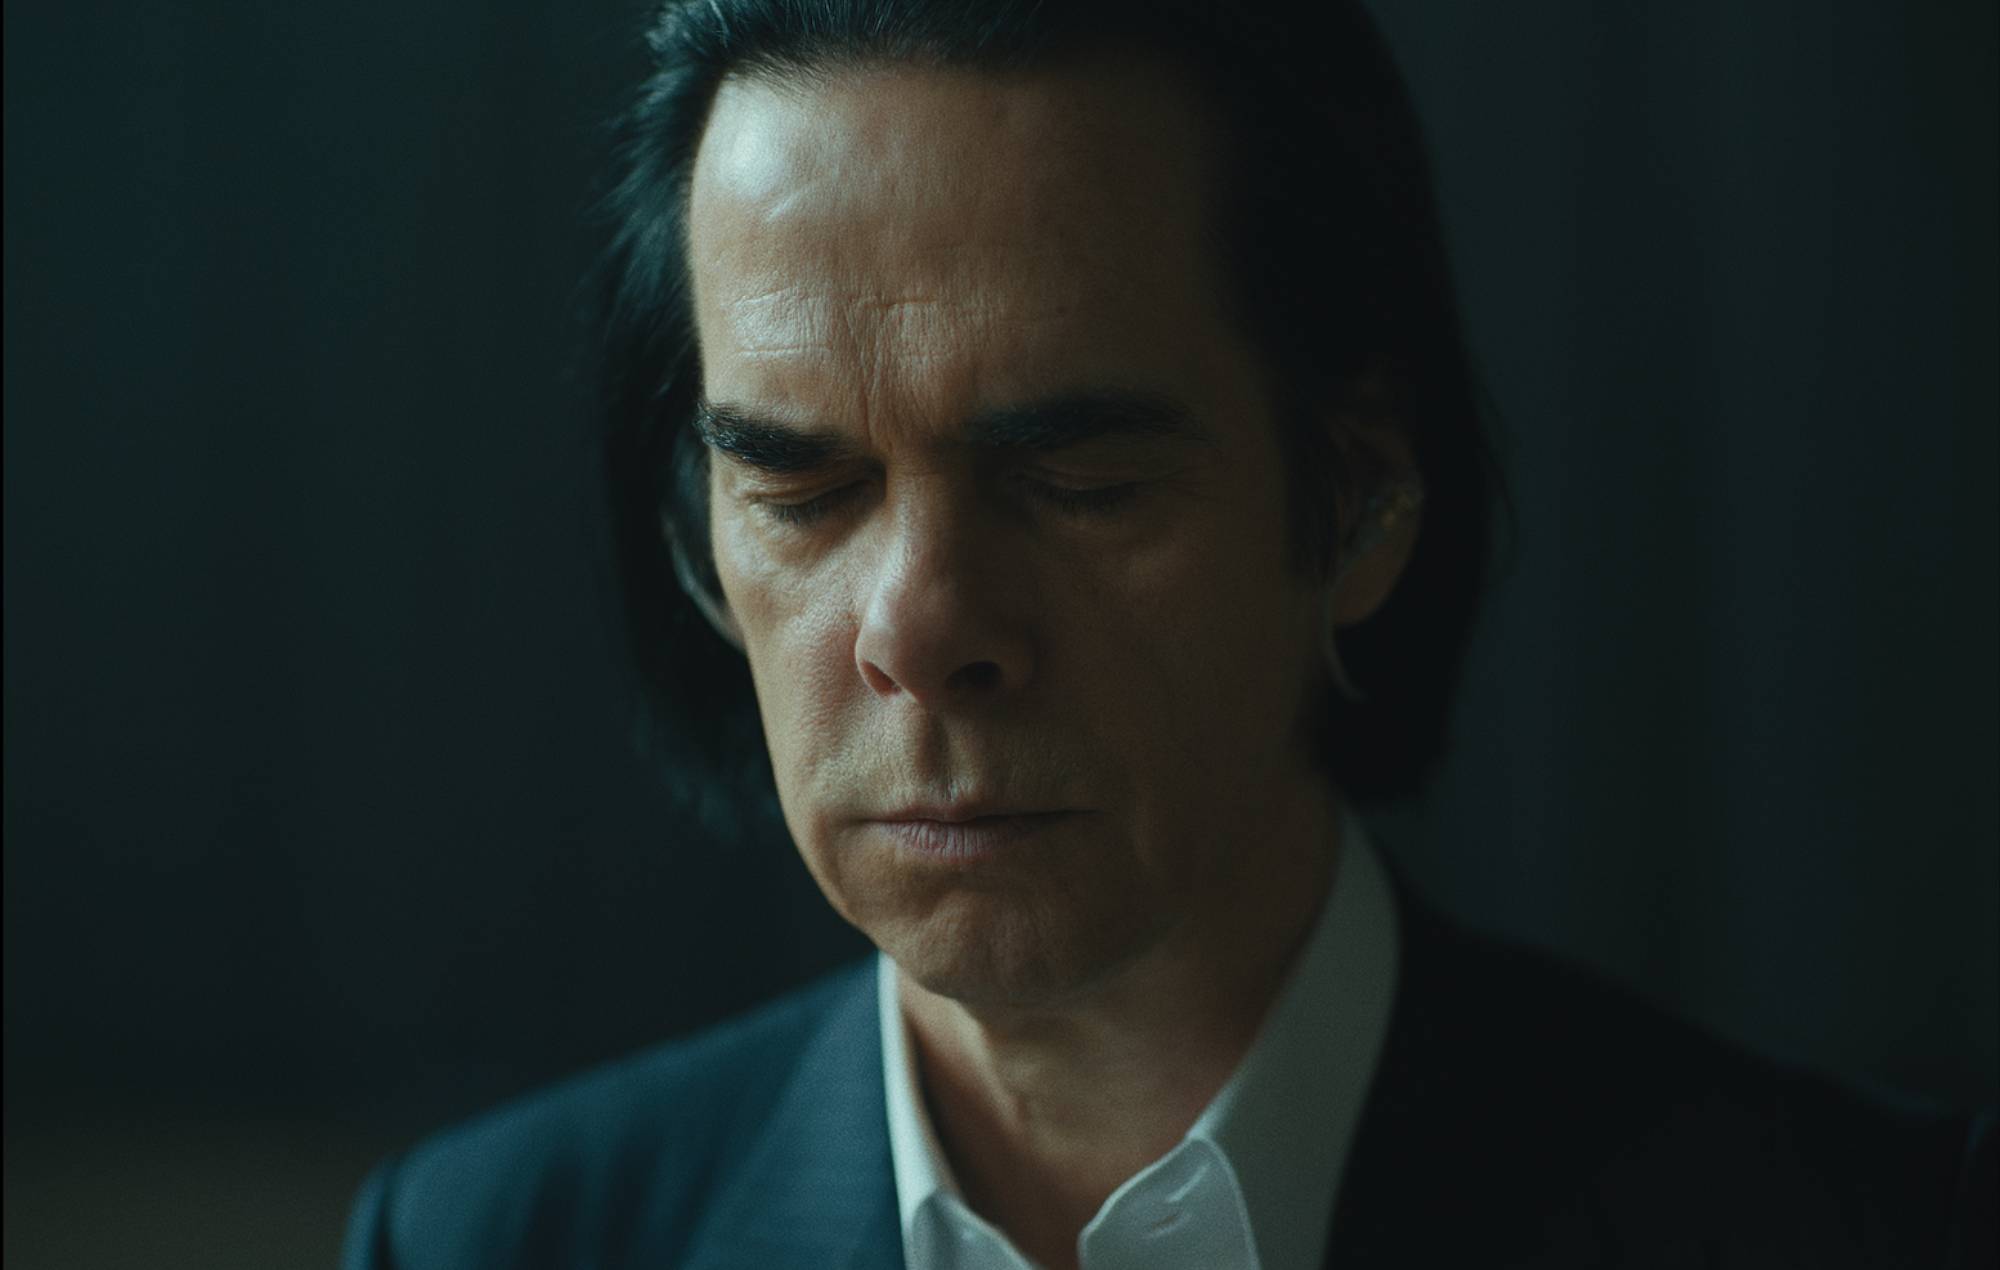 Director Andrew Dominik says new Nick Cave film “shows what he has learned about loss”